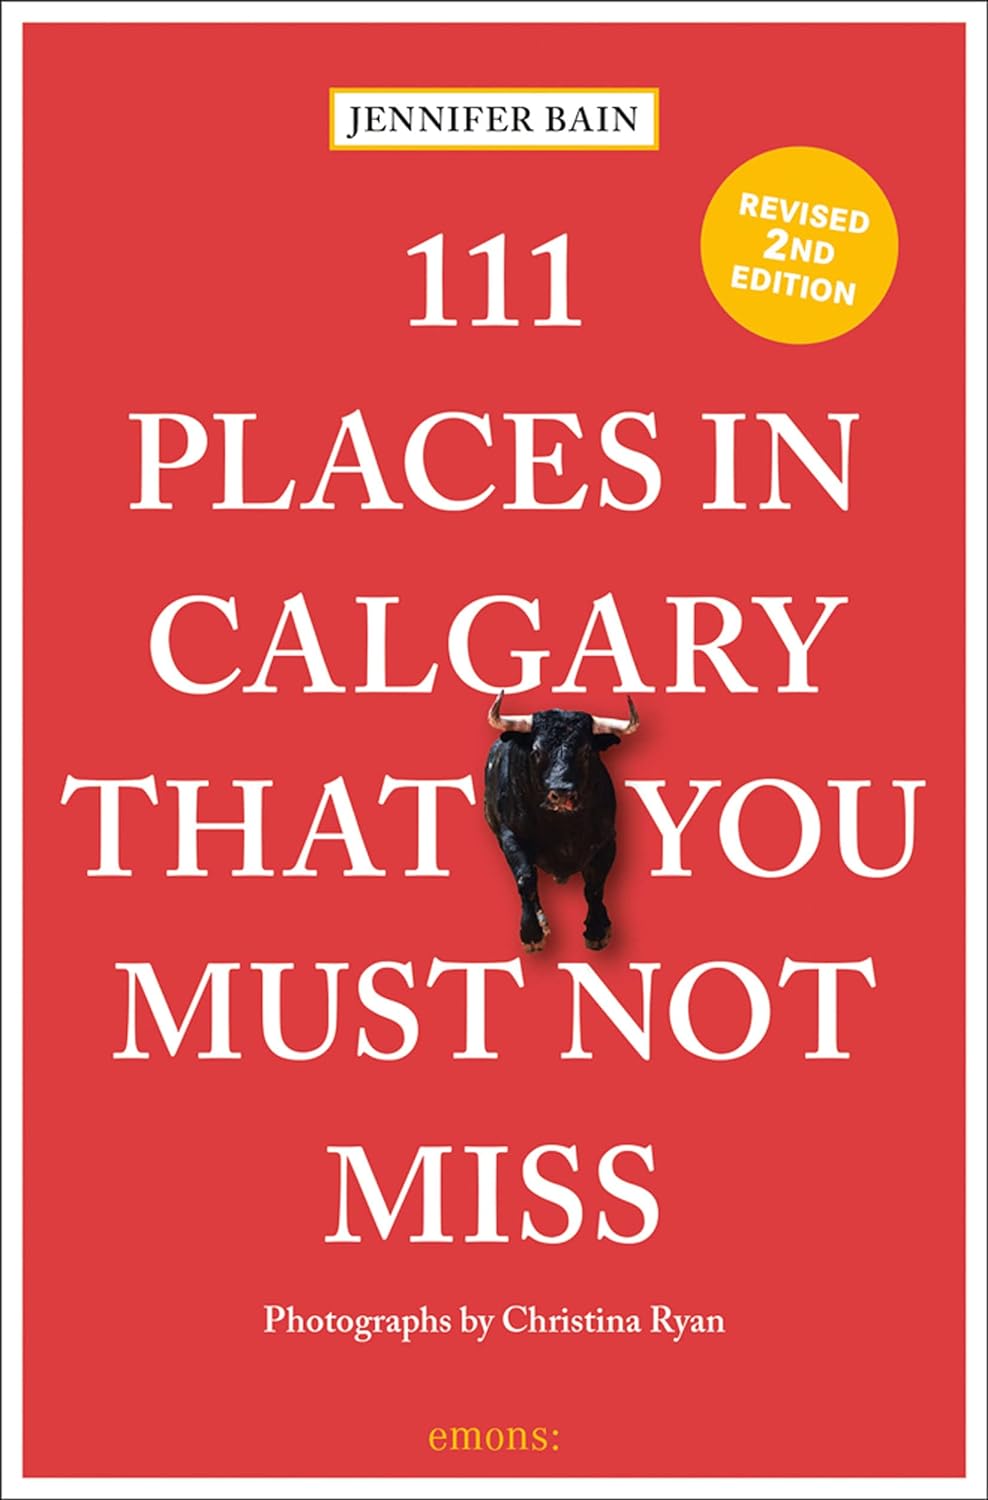 Online bestellen: Reisgids 111 places in Places in Calgary That You Must Not Miss | Emons